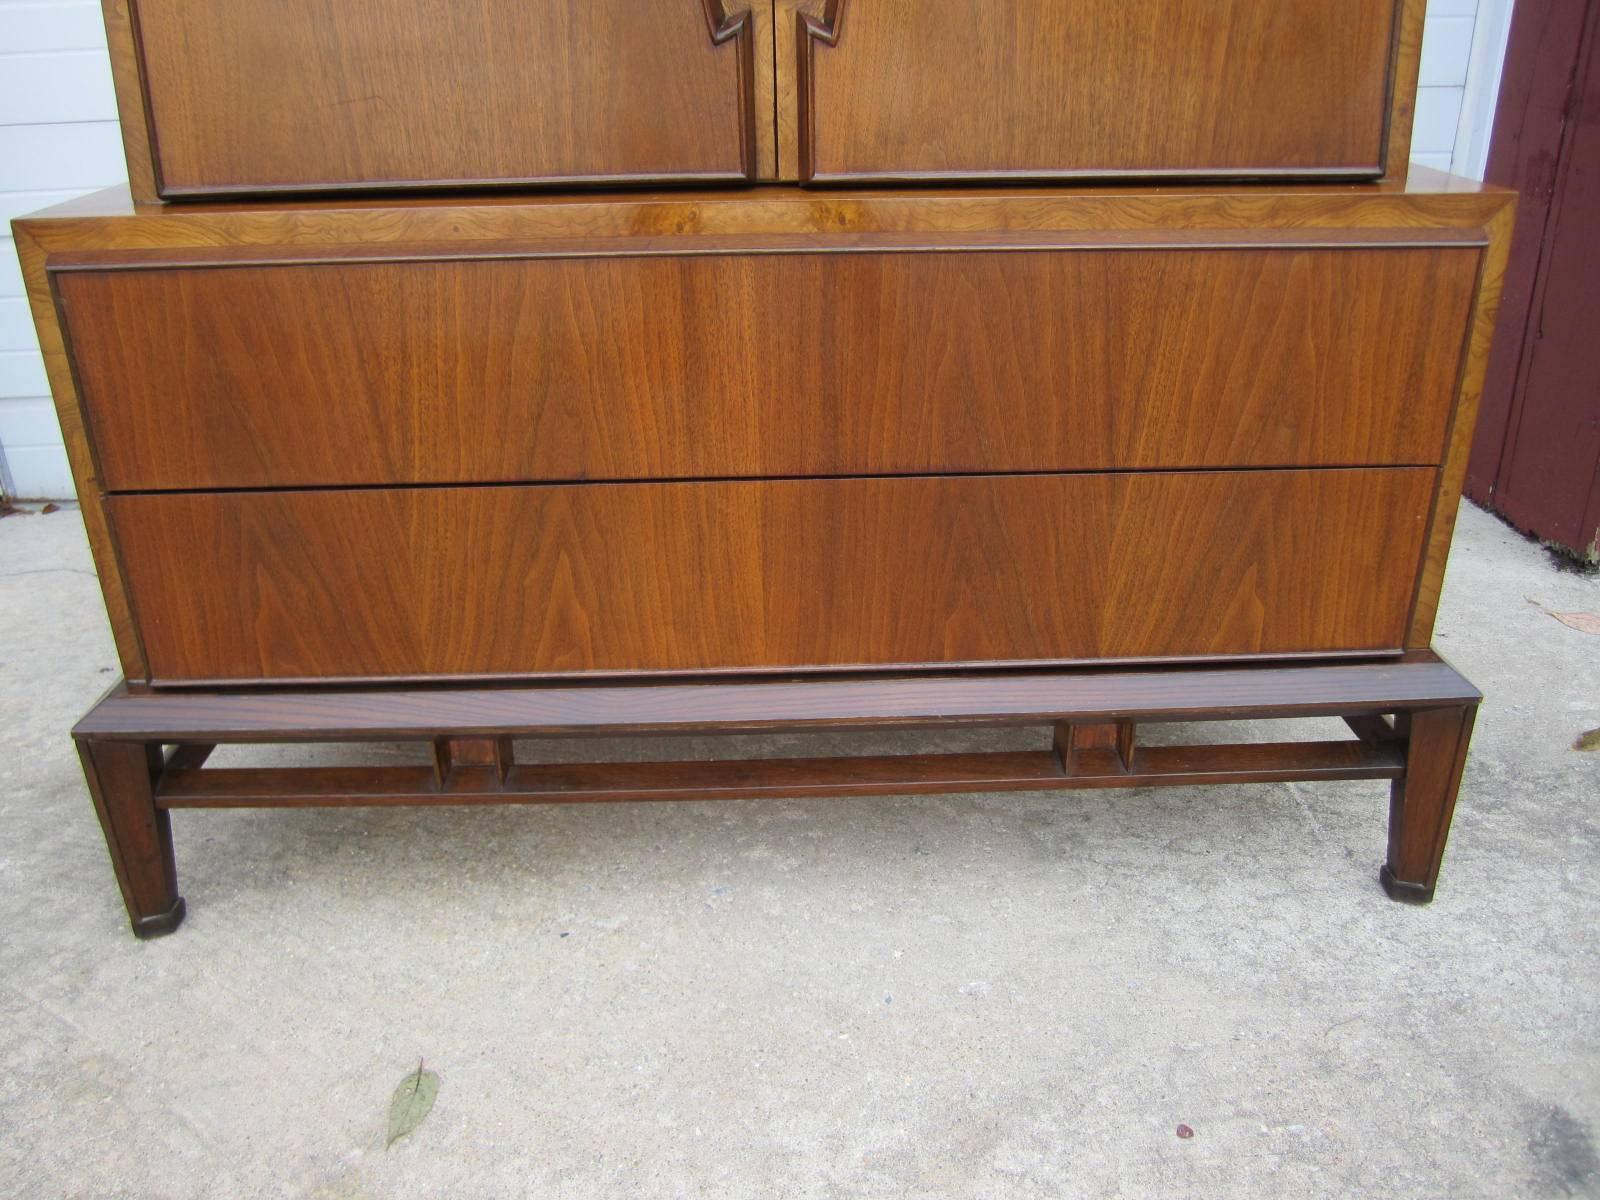 Lovely Hobey Helen tall walnut dresser chest. We love the interesting pierced hardware and the stylish well constructed base. This is a rare and collectible piece by New York socialites and furniture designers, Hobey and Helen Baker. Their pieces